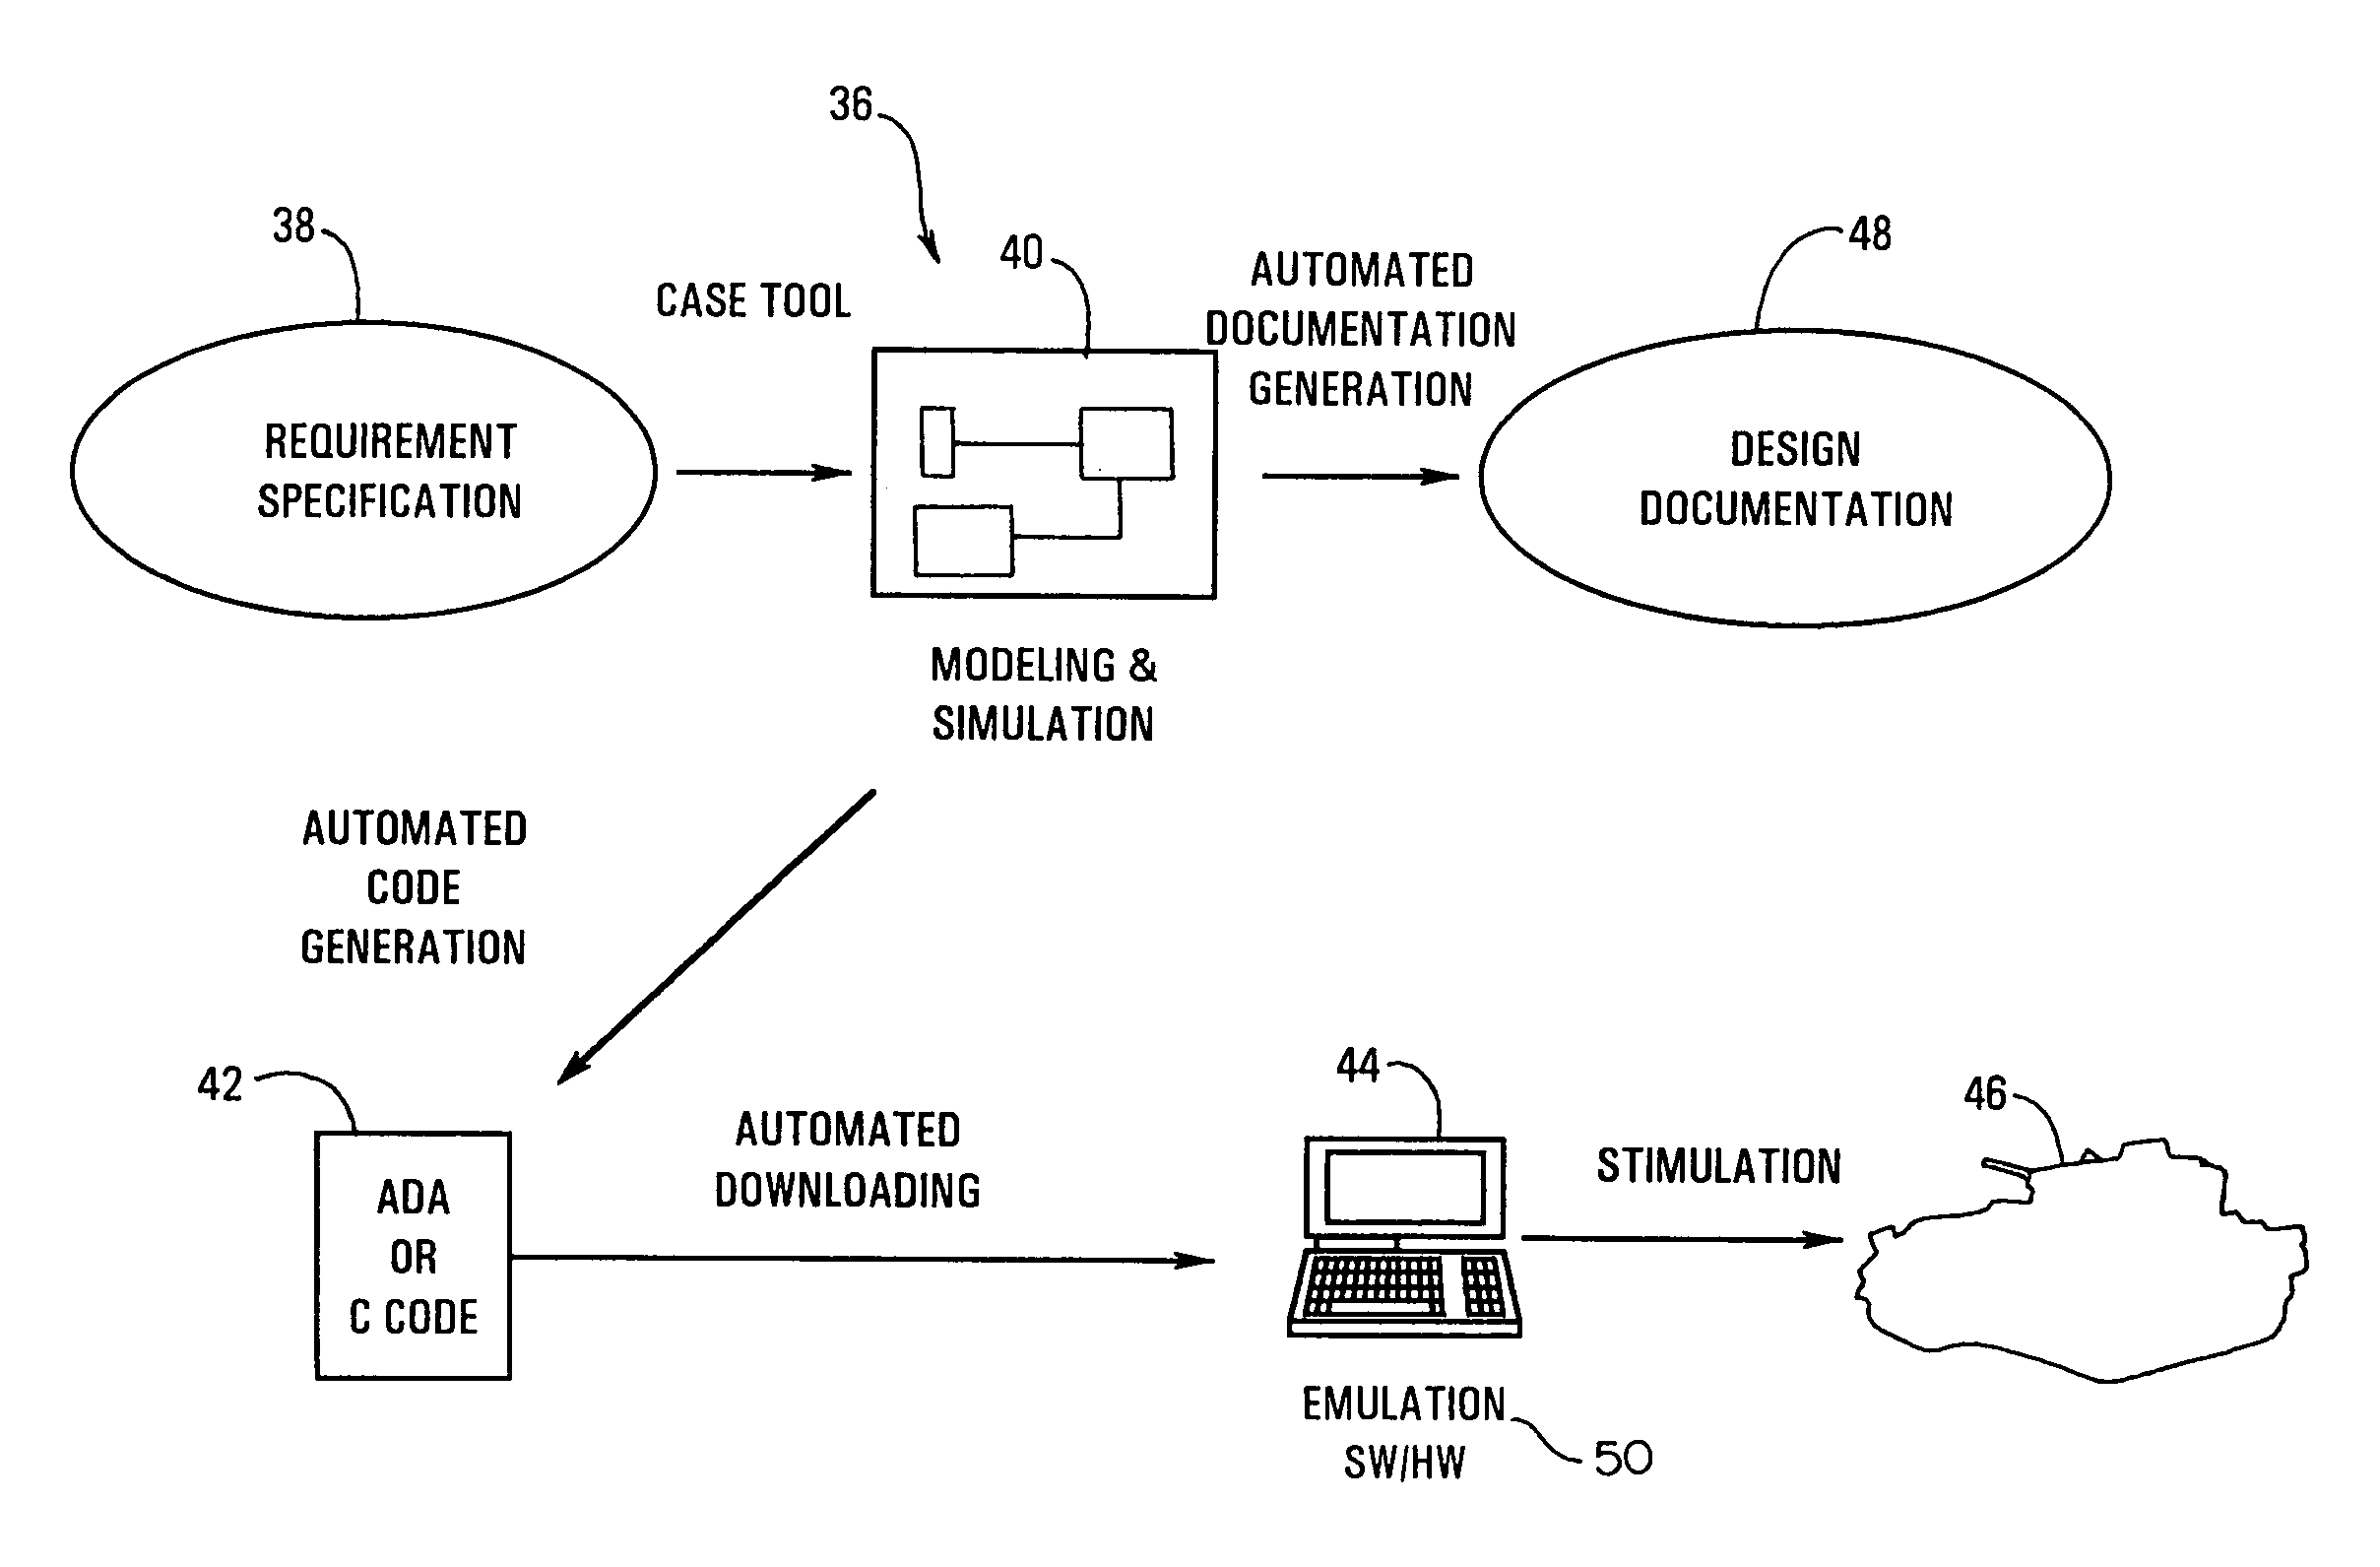 Control system architecture for a multi-component armament system